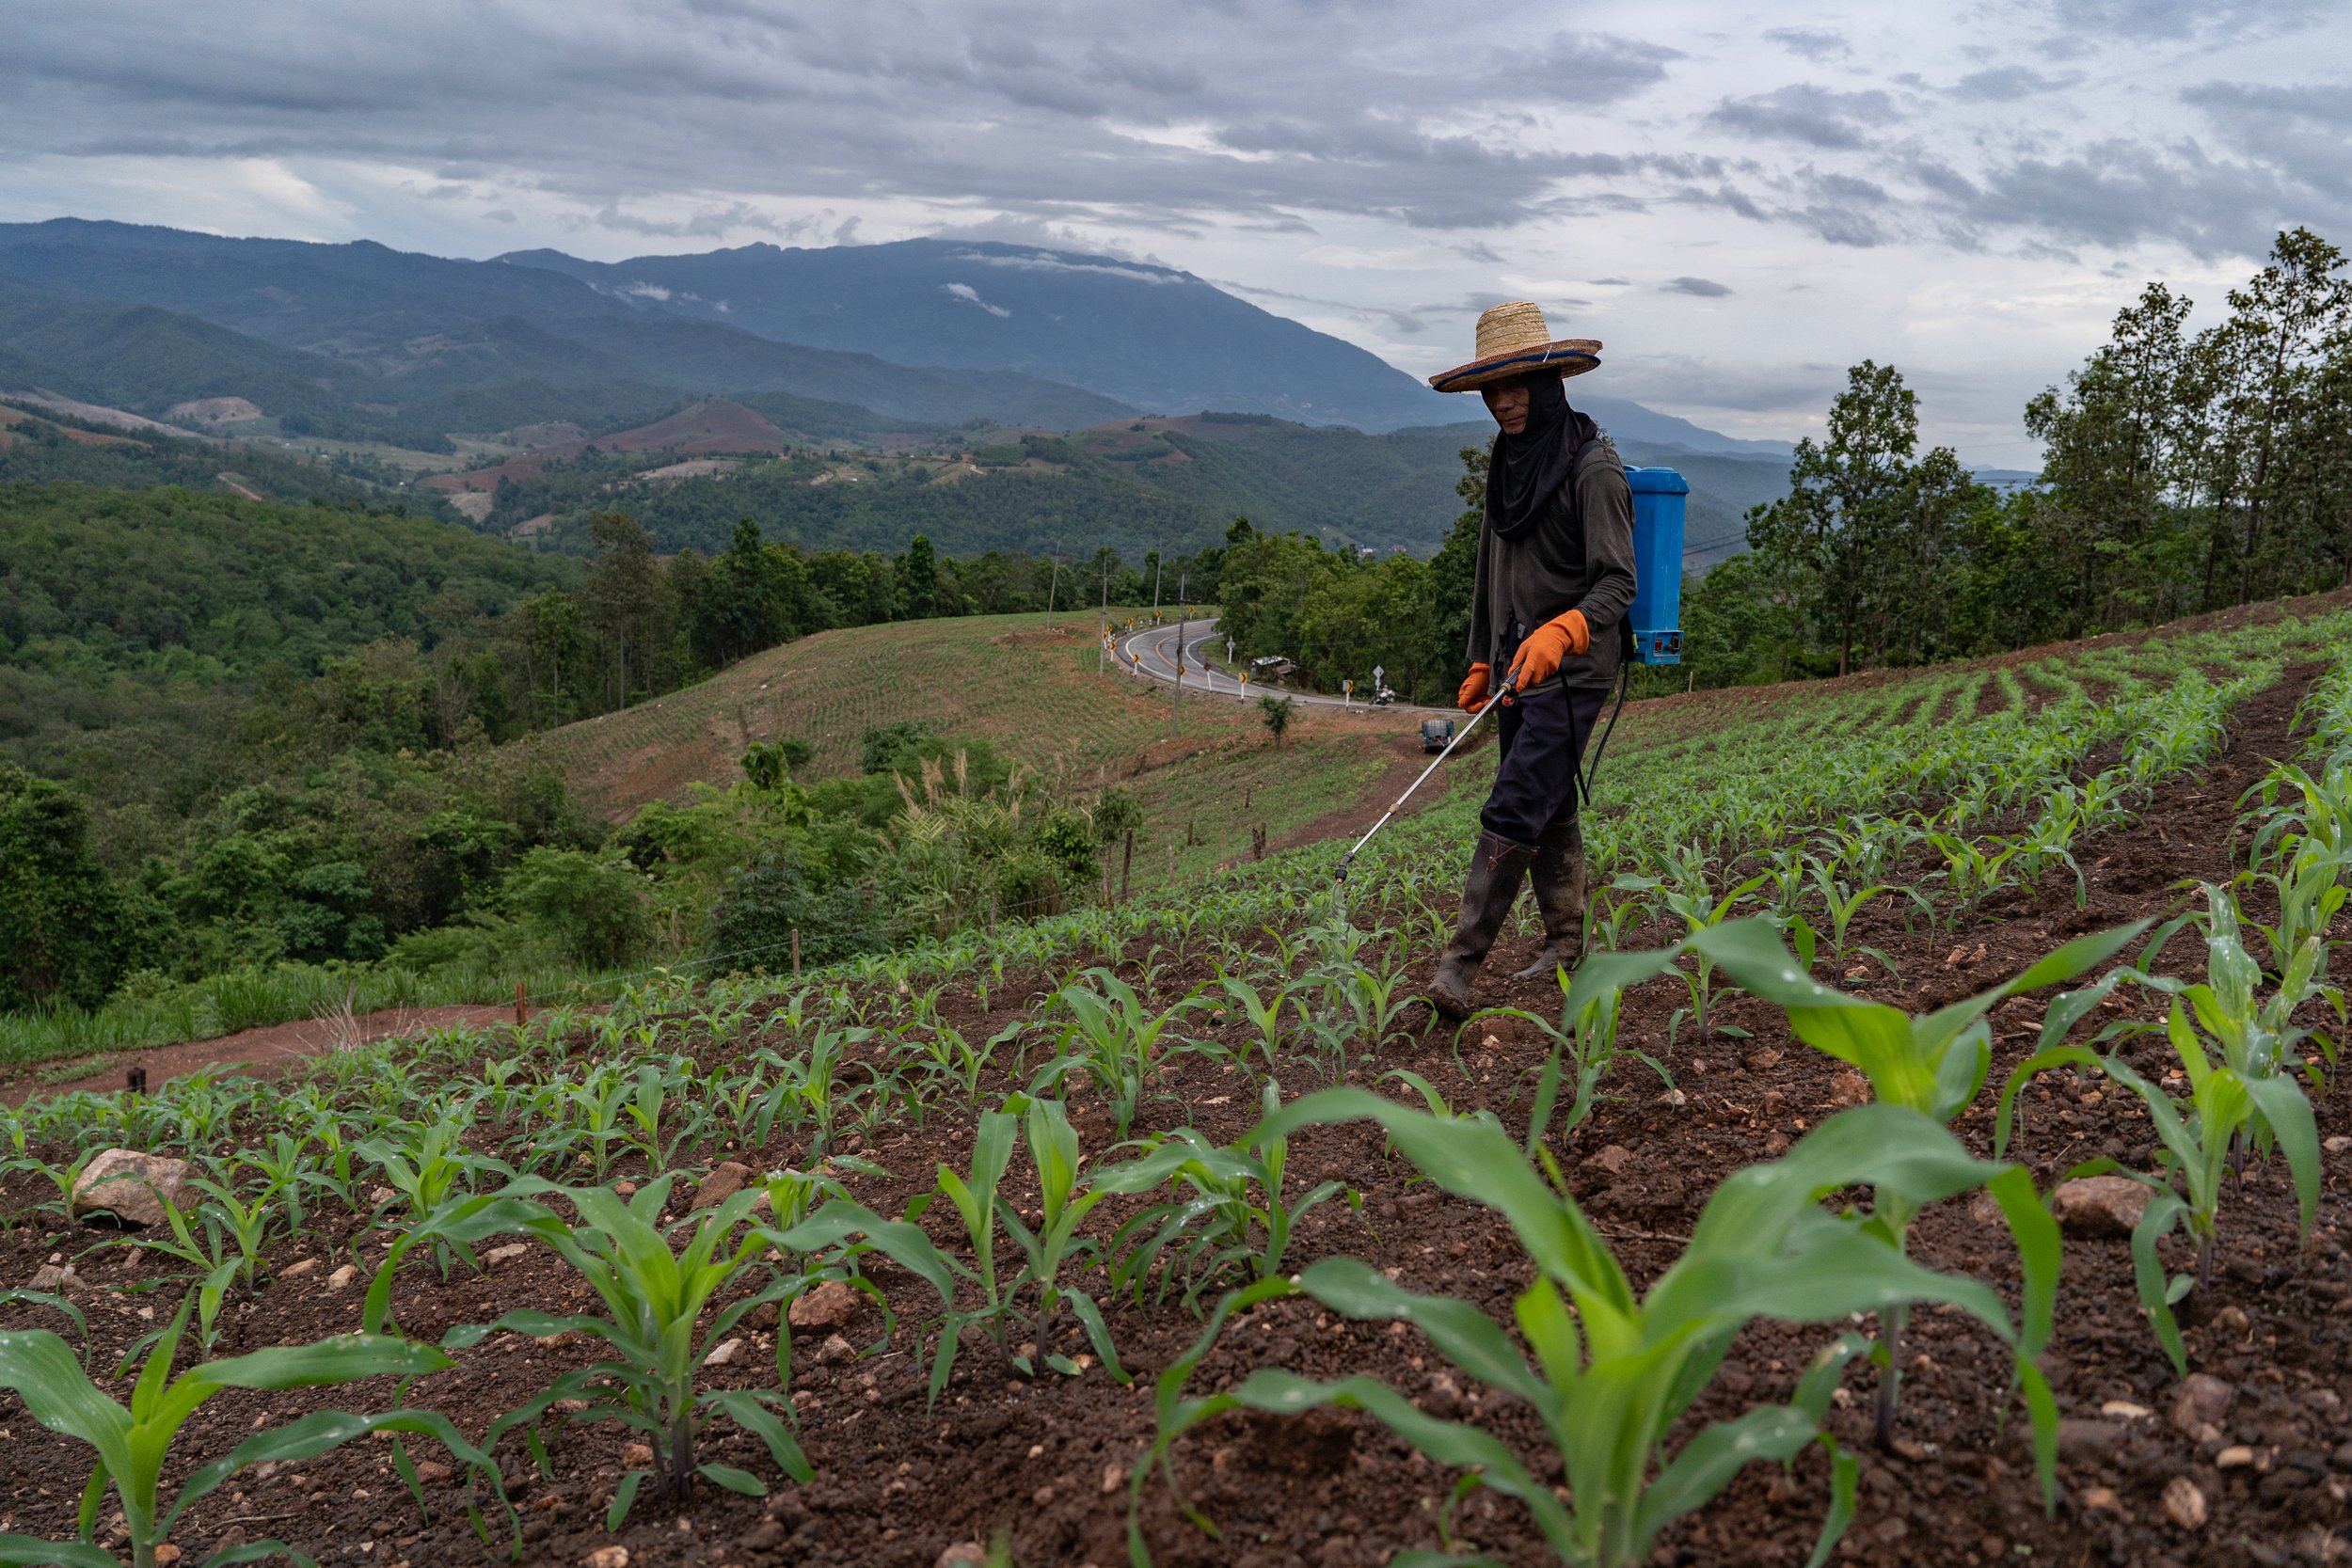  Thailand, Chiang Mai. 30 June 2023. A farmer sprays pesticides to eliminate unwanted weeds and insects that interfere with corn planting on the mountainside. Corn cultivation has expanded rapidly in the mountainous region of northern Thailand. 